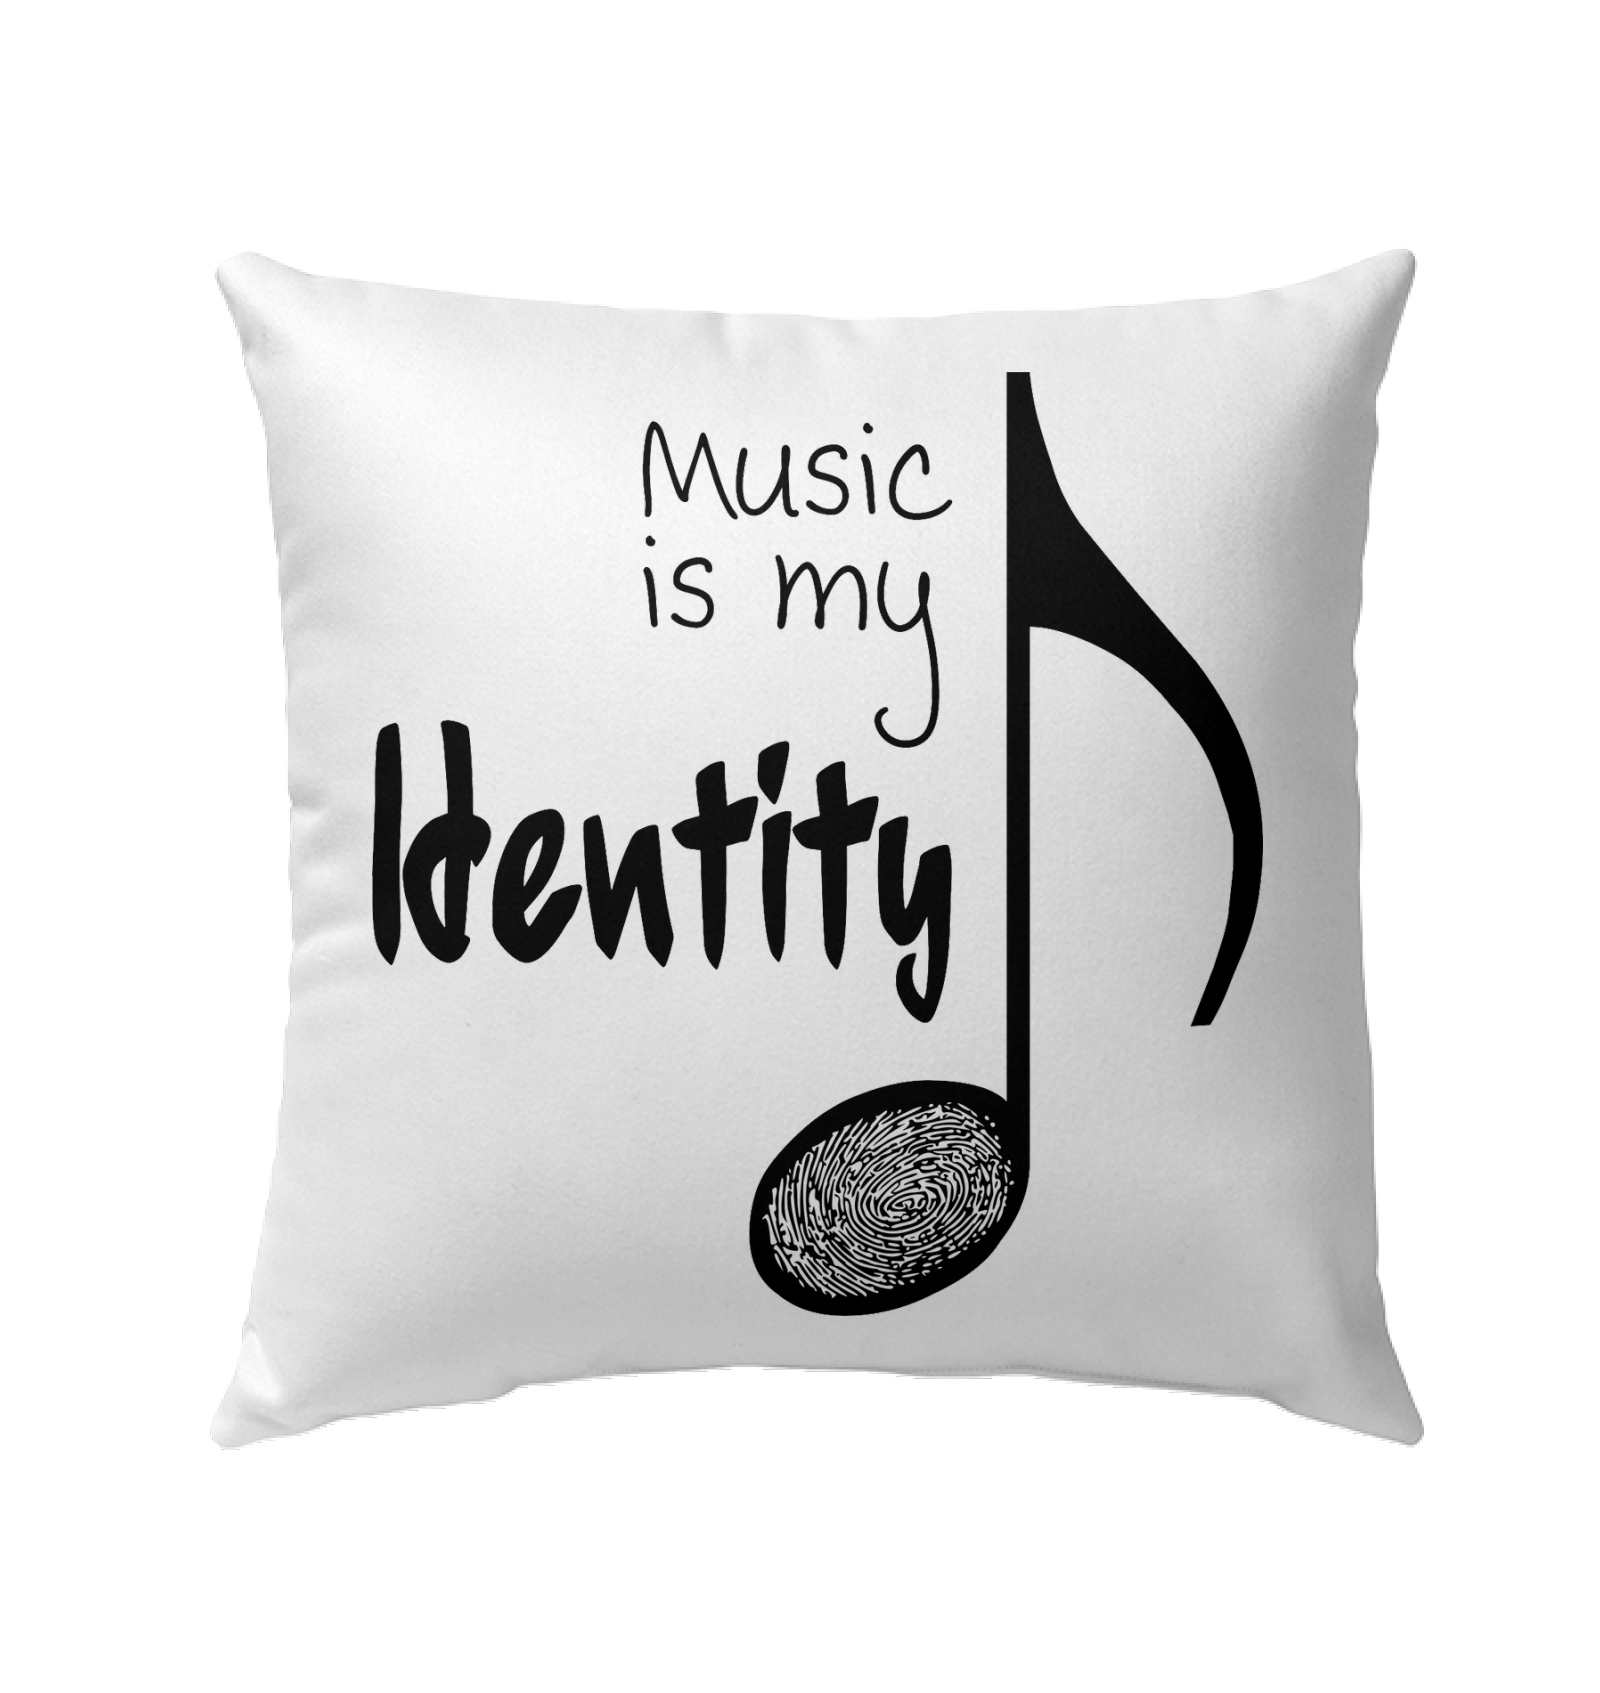 Music is my Identity - Outdoor Pillow